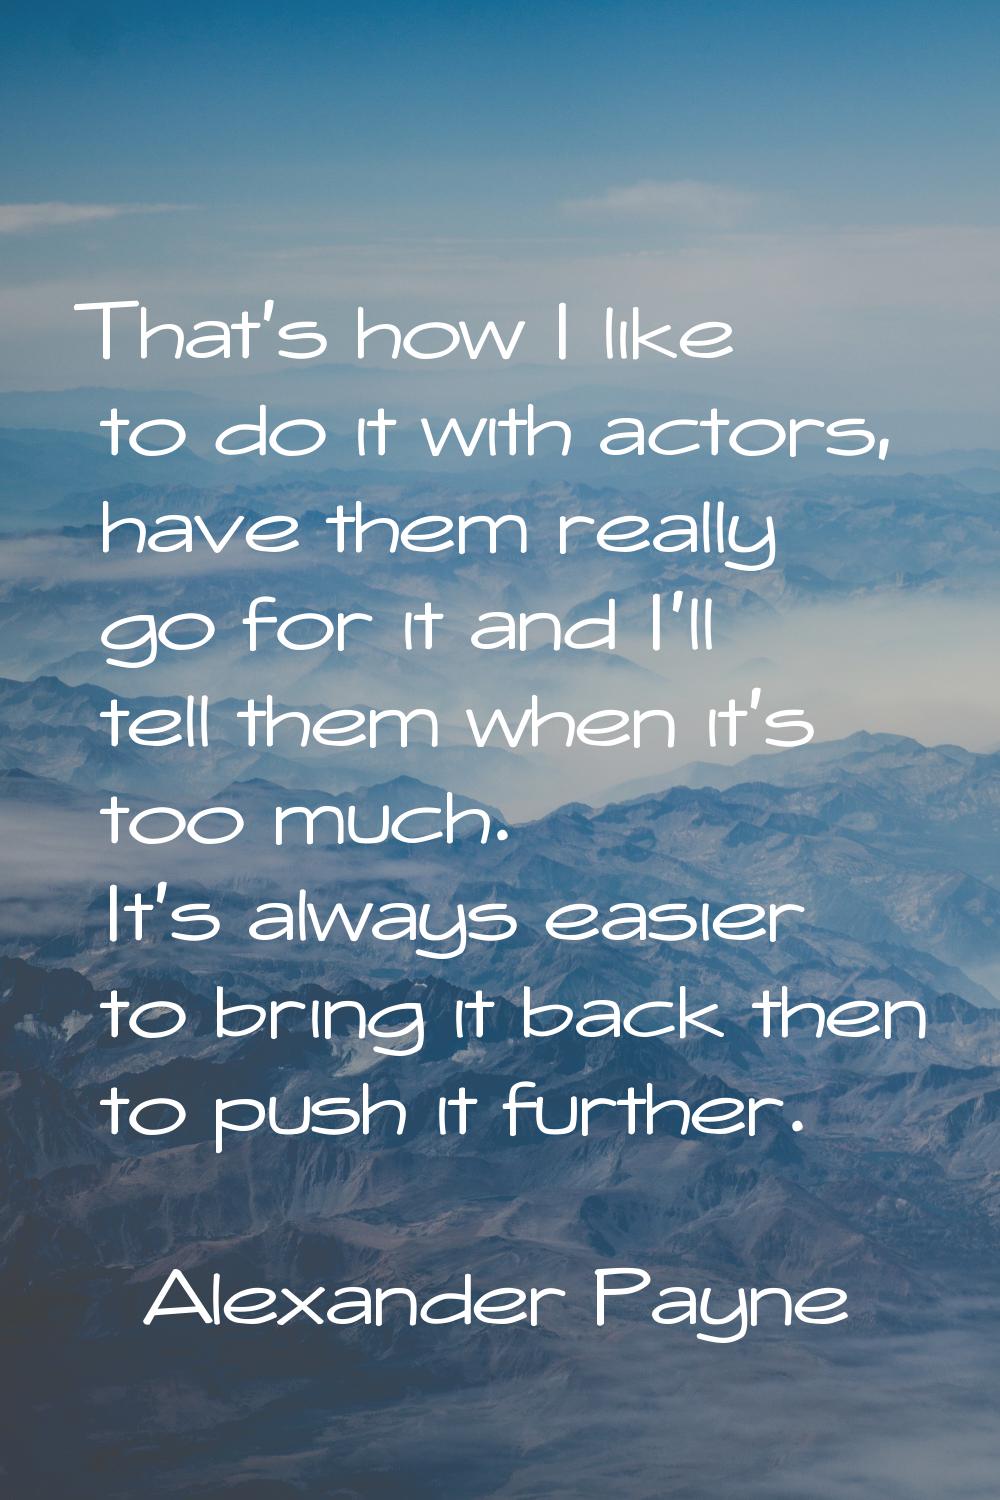 That's how I like to do it with actors, have them really go for it and I'll tell them when it's too